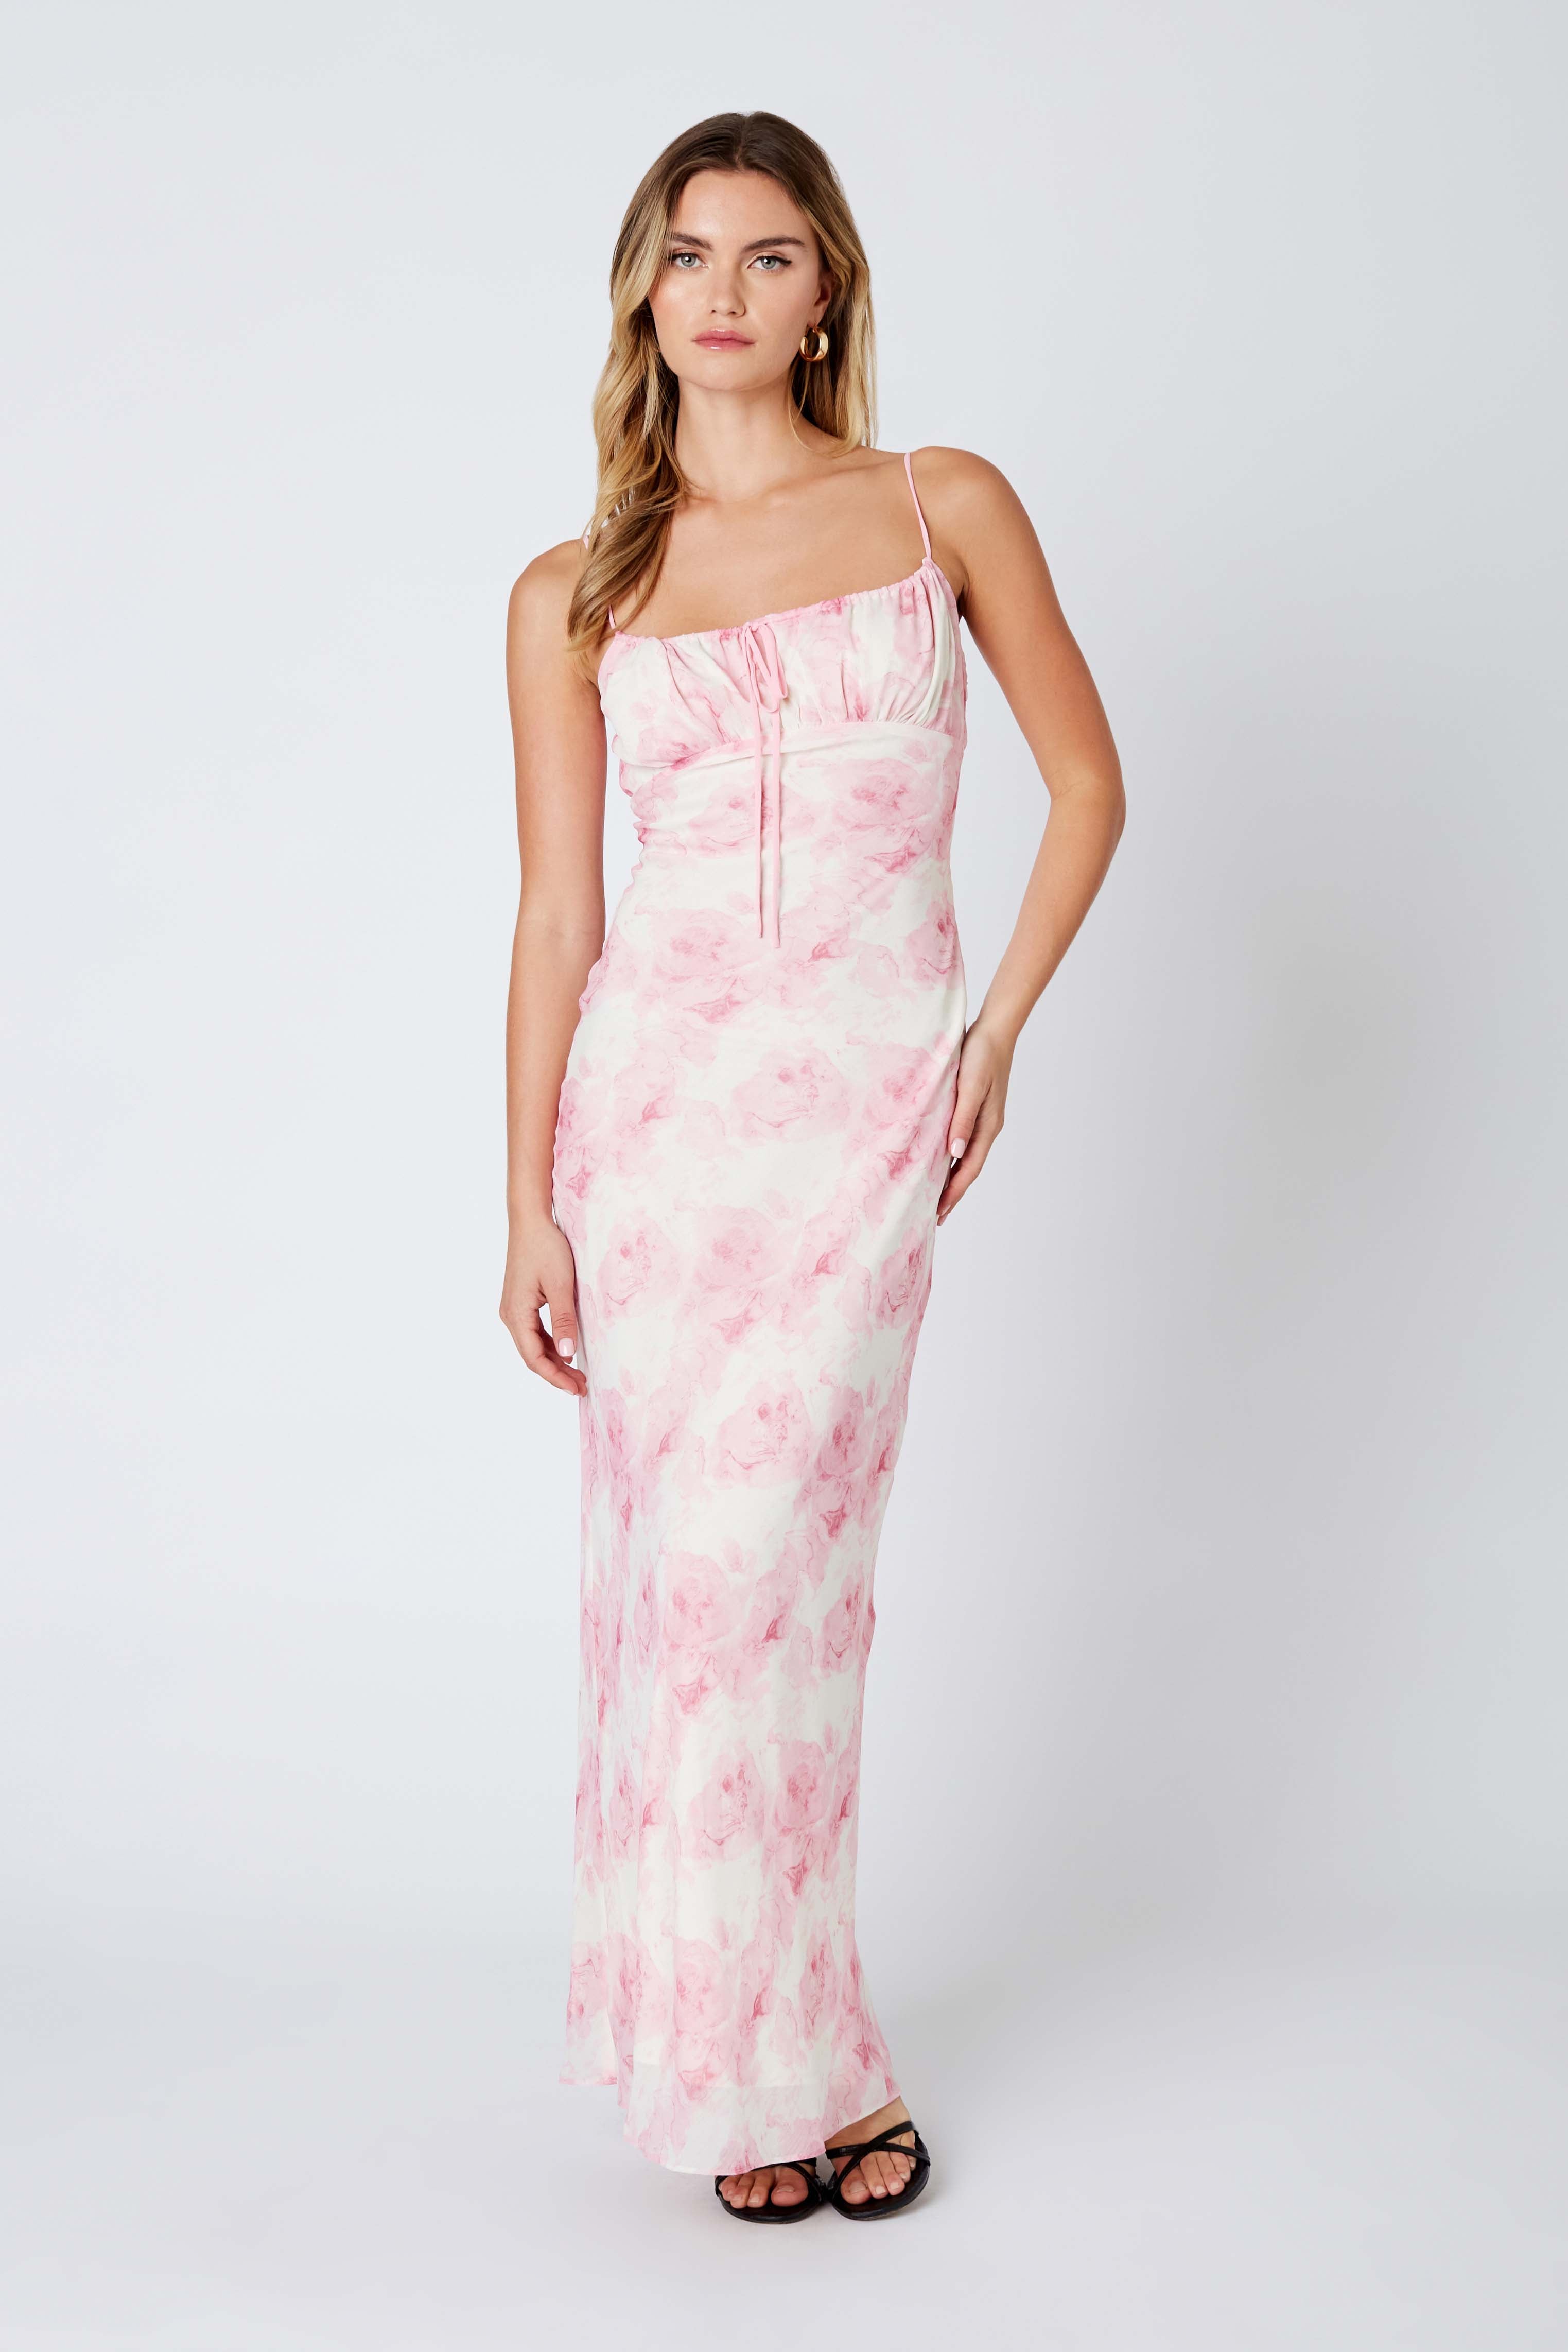 Floral Maxi Dress in Cameo Pink Front View